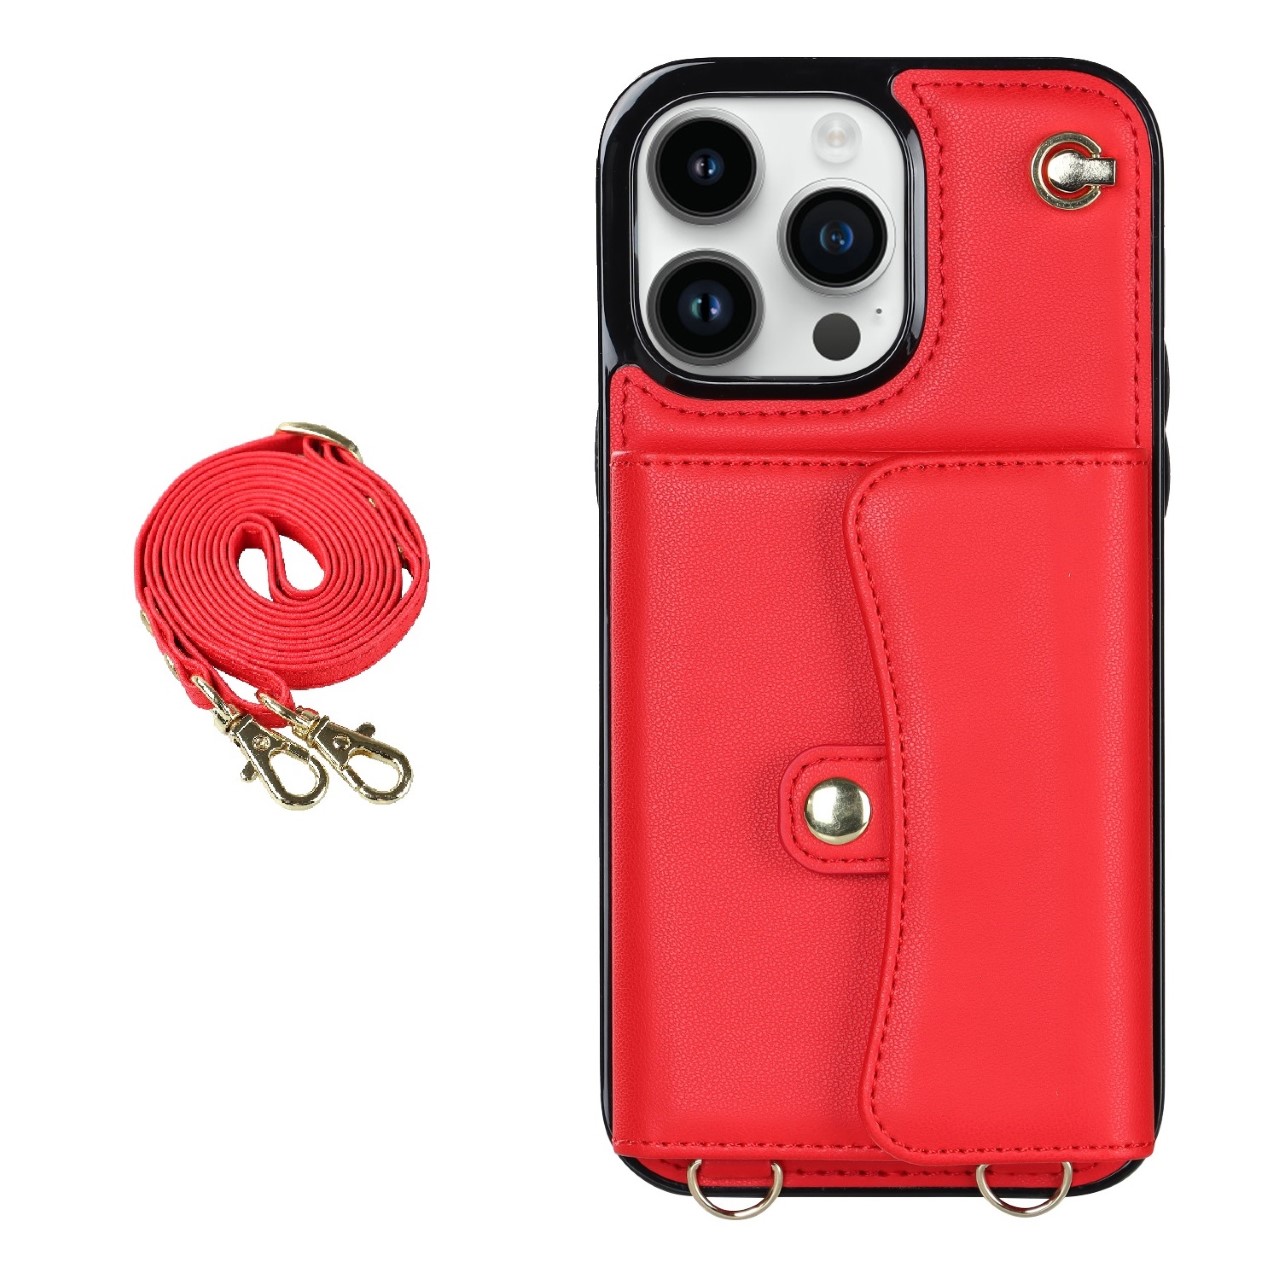 Samsung Galaxy A71 Back Cover Hoesje met Koord - Back Cover - Kunstleer - Pasjeshouder - Koord - Samsung Galaxy A71 - Rood